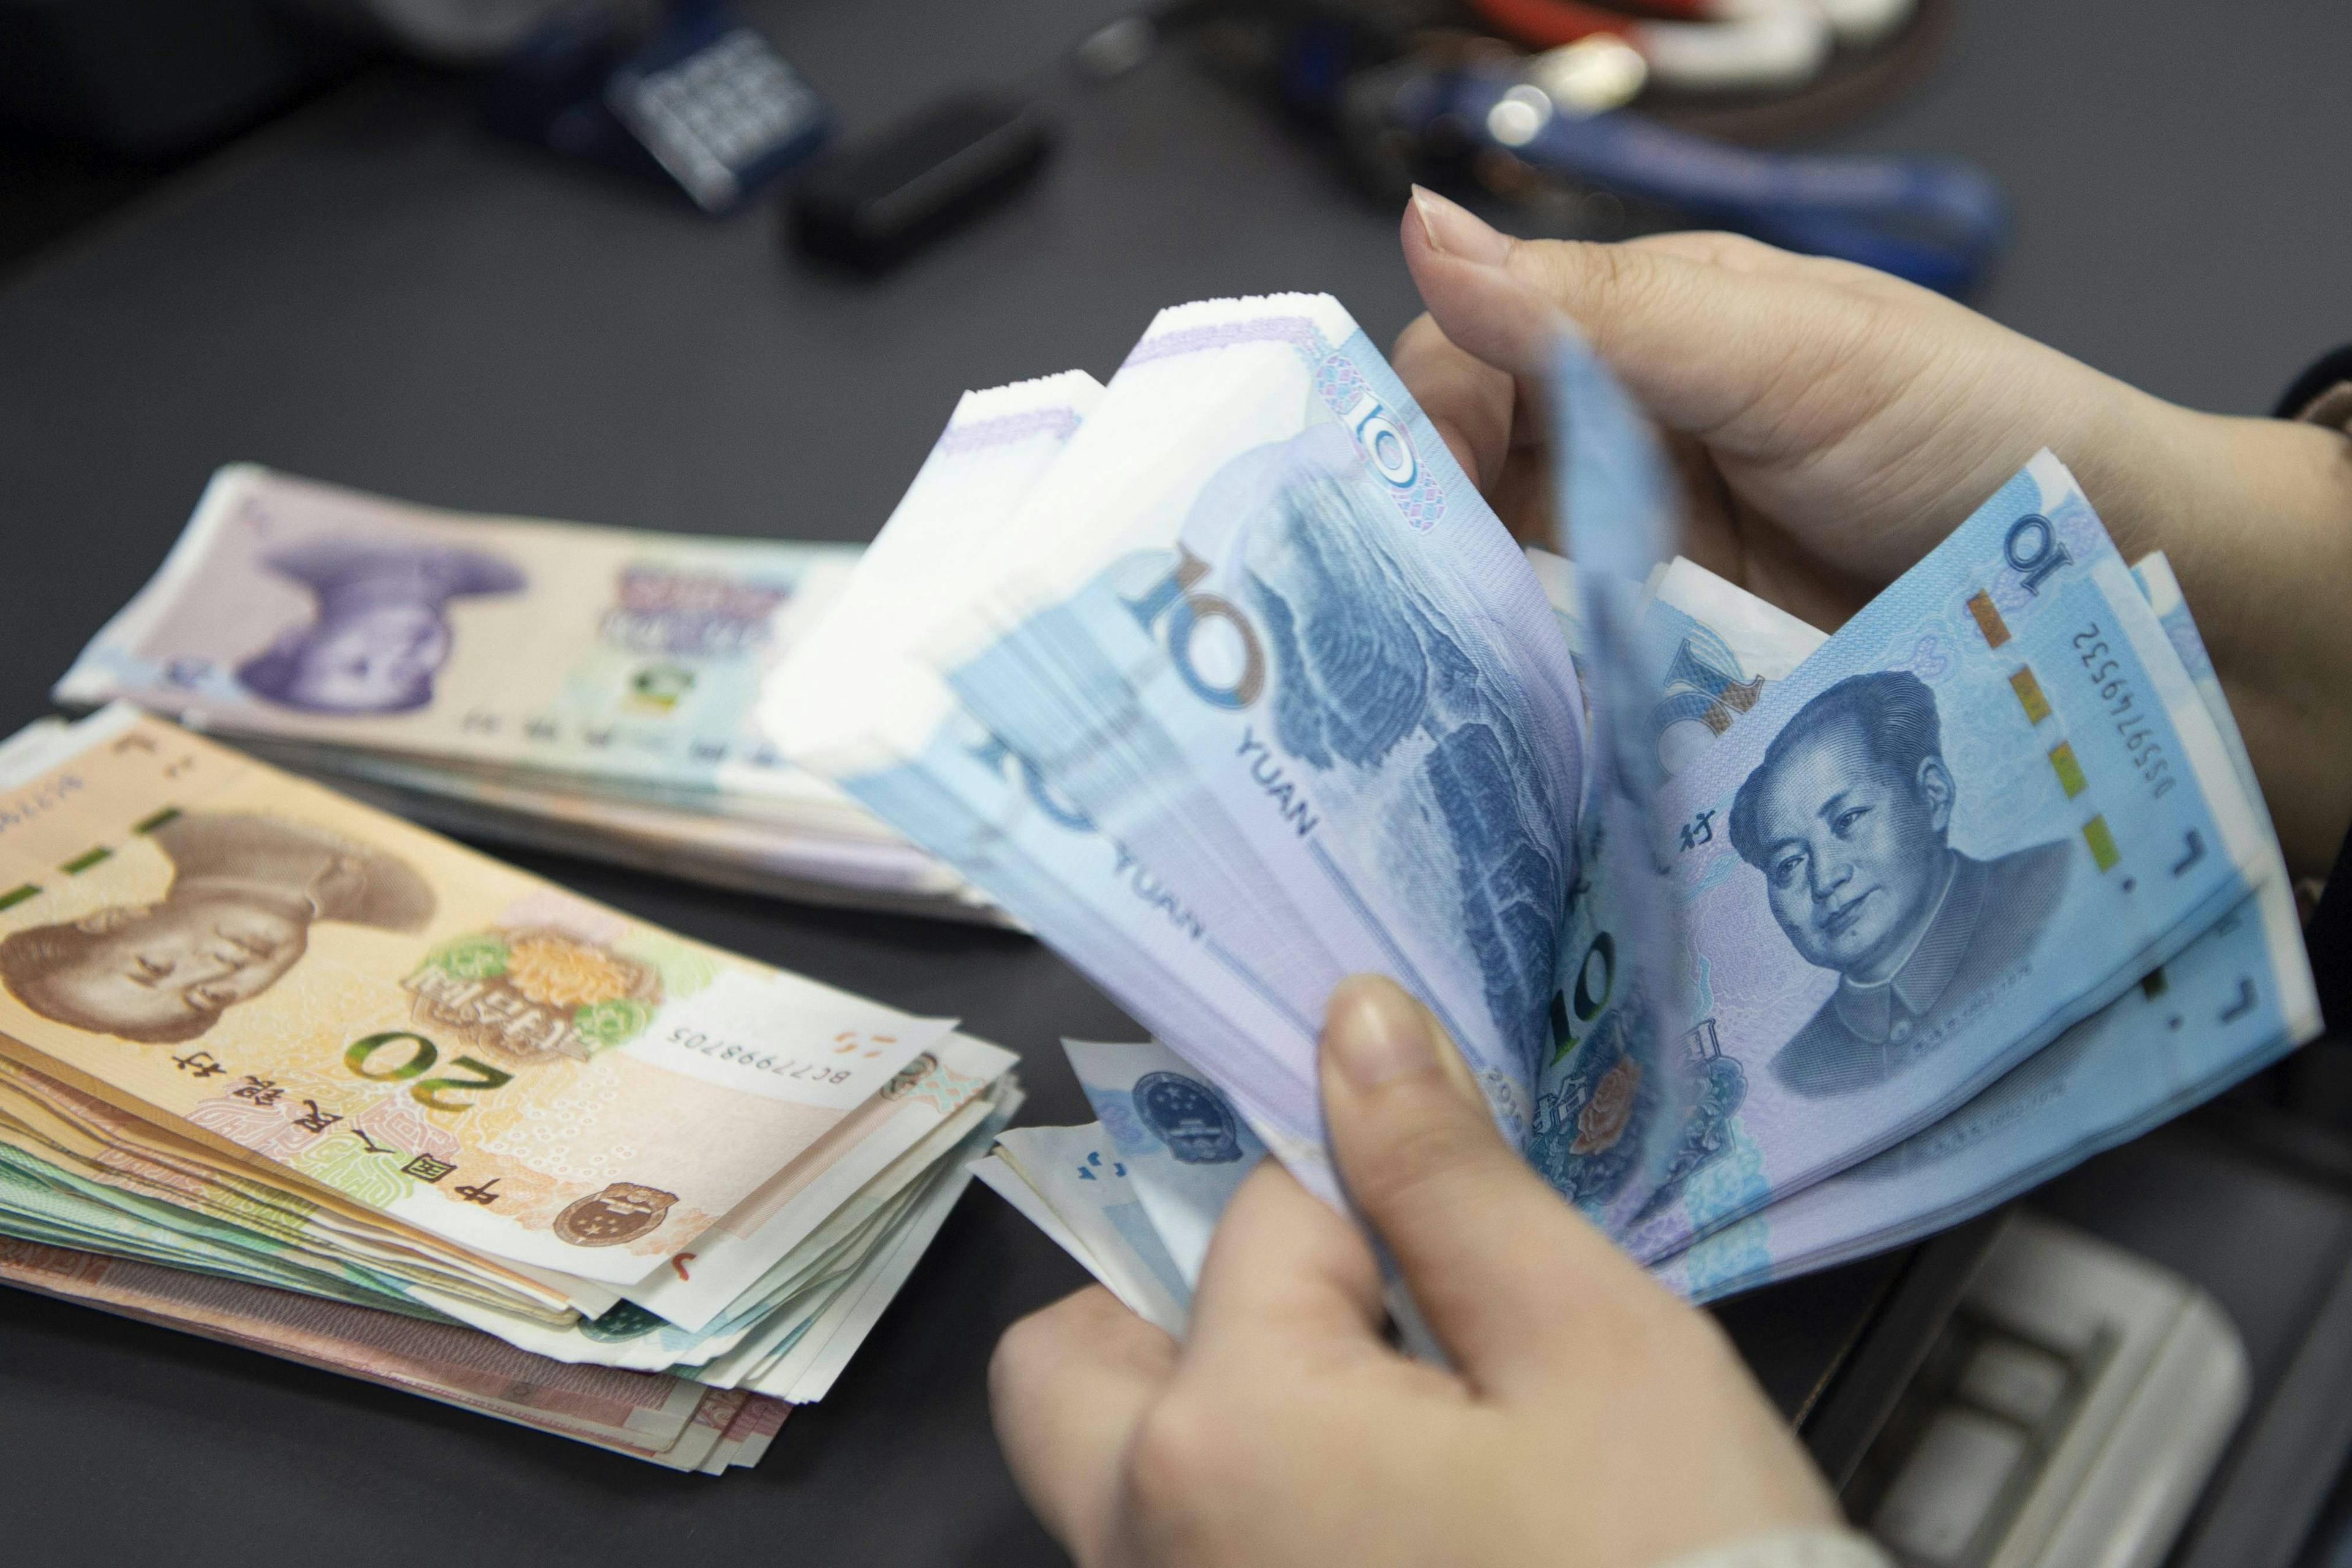 The People s Bank of China Announced A Cut in Reserve Requiremen A staff member in the personal finance business area of a bank is counting and arranging the RMB deposited by customers in the daily account in Haian, China